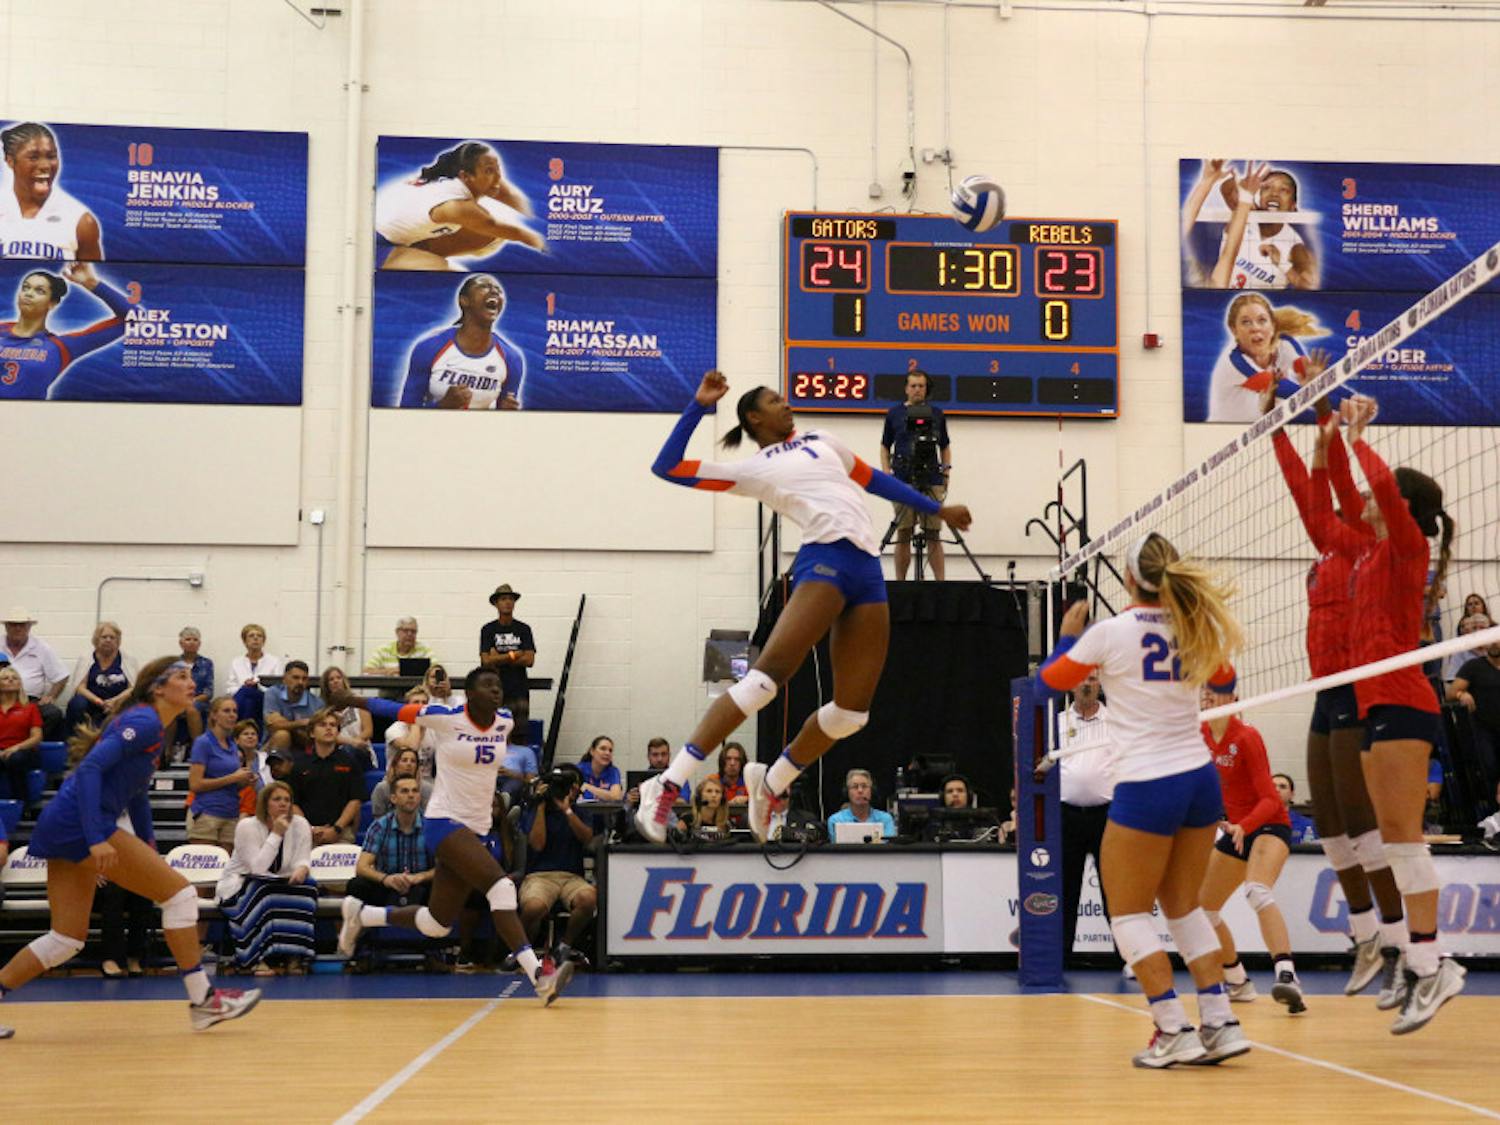 Rhamat Alhassan jumps for a kill during Florida's 3-0 win over Ole Miss on Oct. 28, 2016.